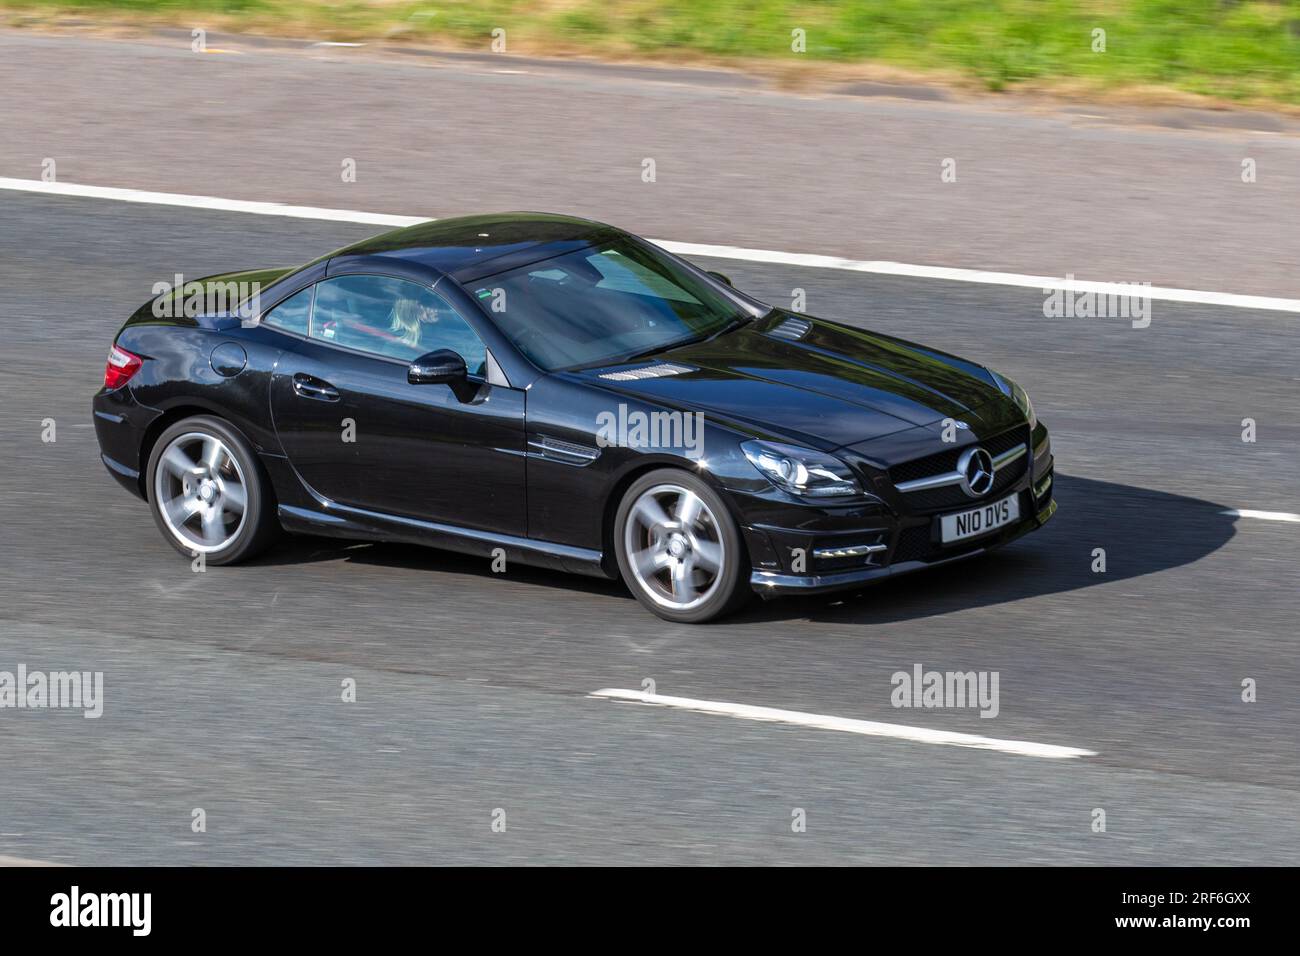 2016 Mercedes-Benz Slk 250 D Amg Sport Auto Slk250d 9G-Tronic Auto Start/Stop Black Car Roadster Diesel 2143 cc travelling at speed on the M6 motorway in Greater Manchester, UK Stock Photo